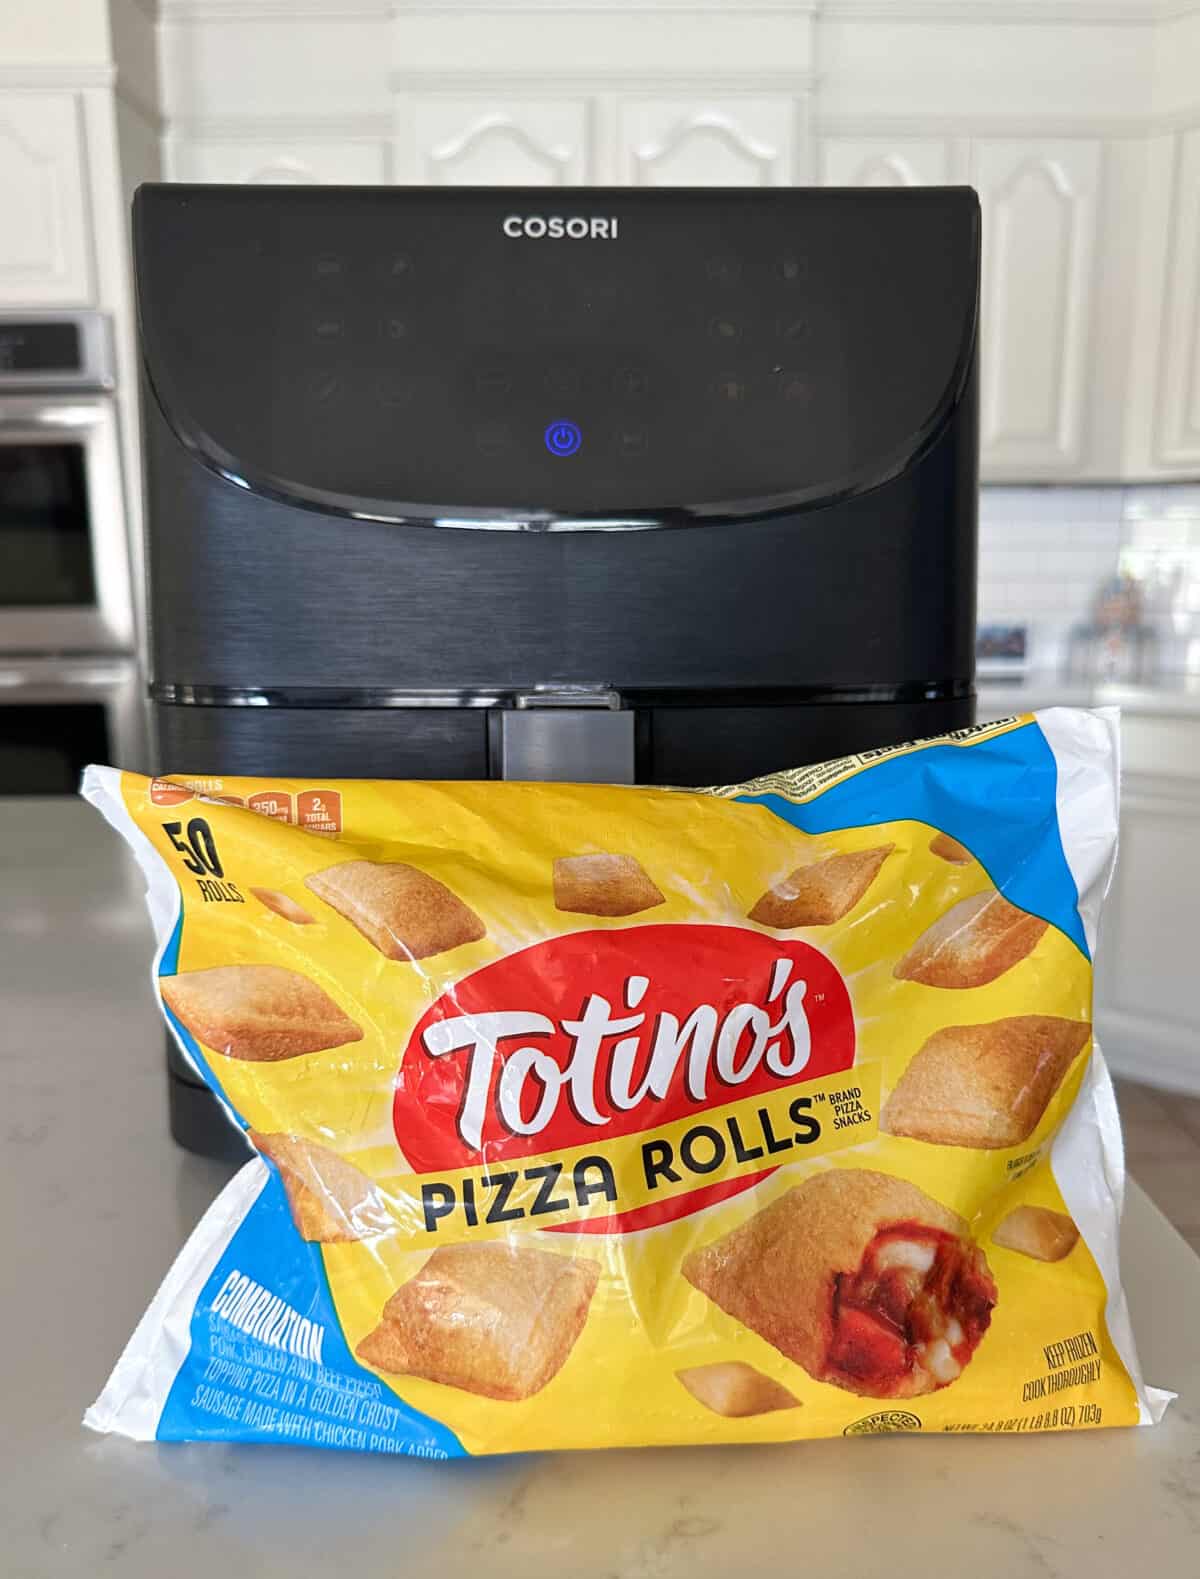 bag of pizza rolls and air fryer on counter